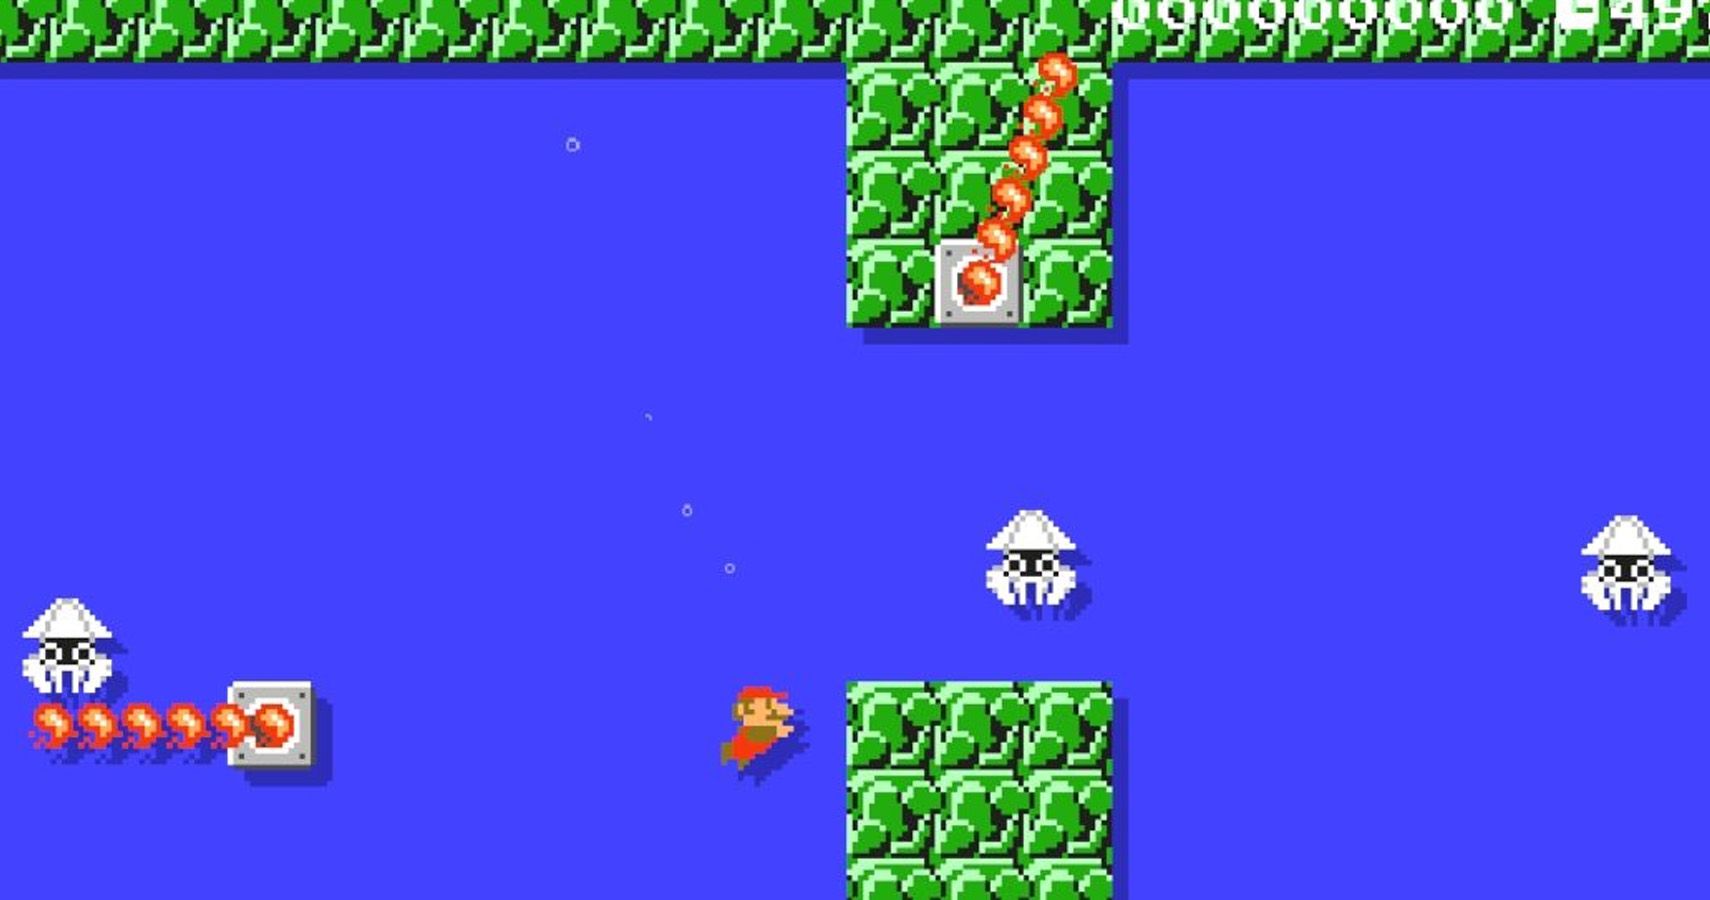 how many worlds are there in the original super mario bros